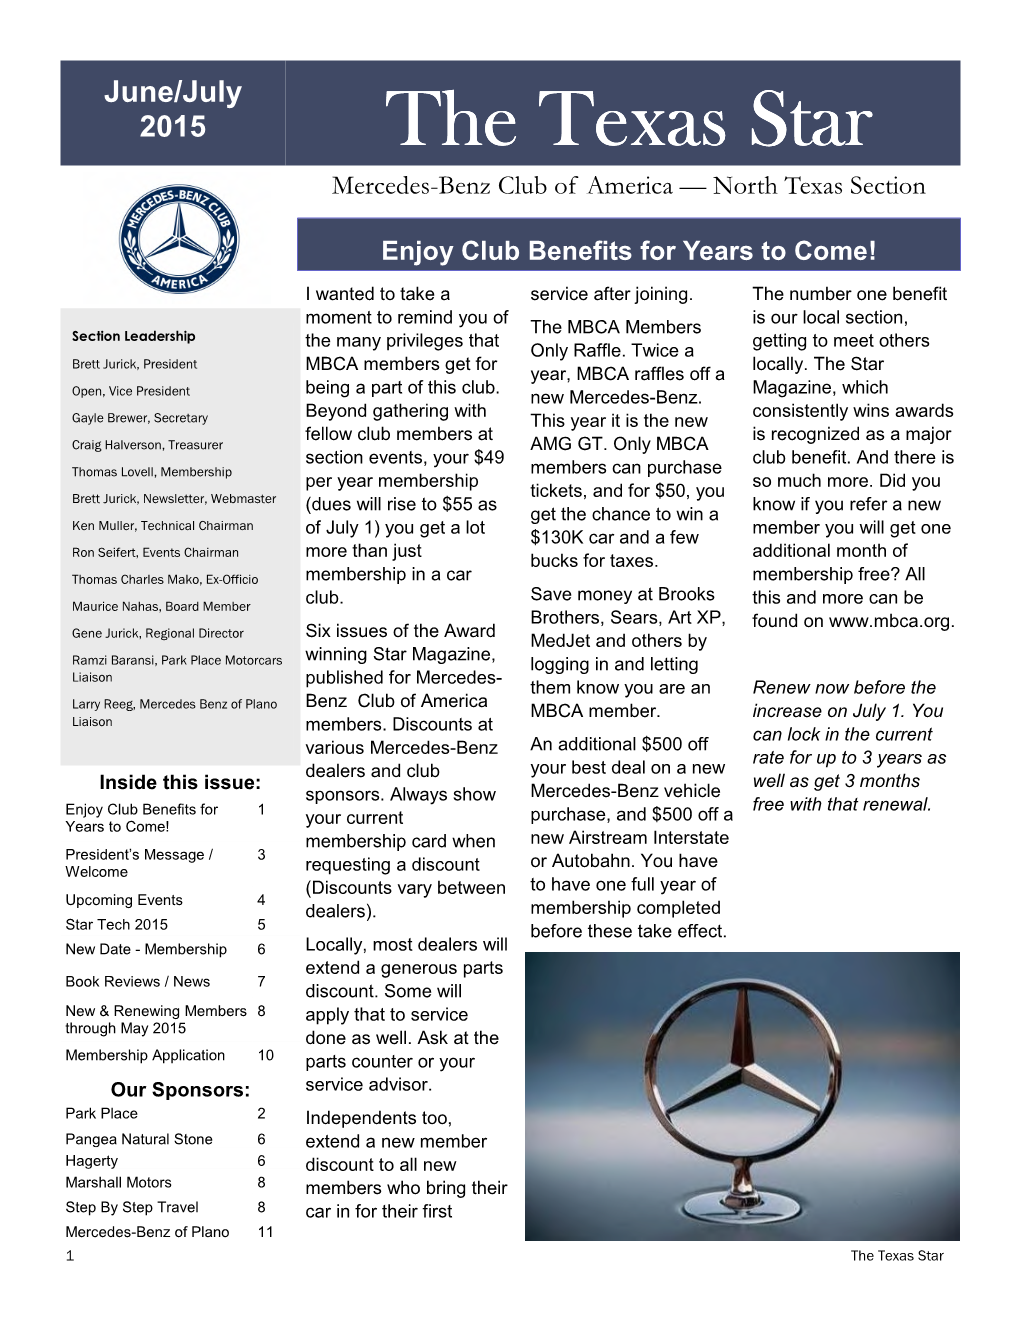 The Texas Star Mercedes-Benz Club of America — North Texas Section